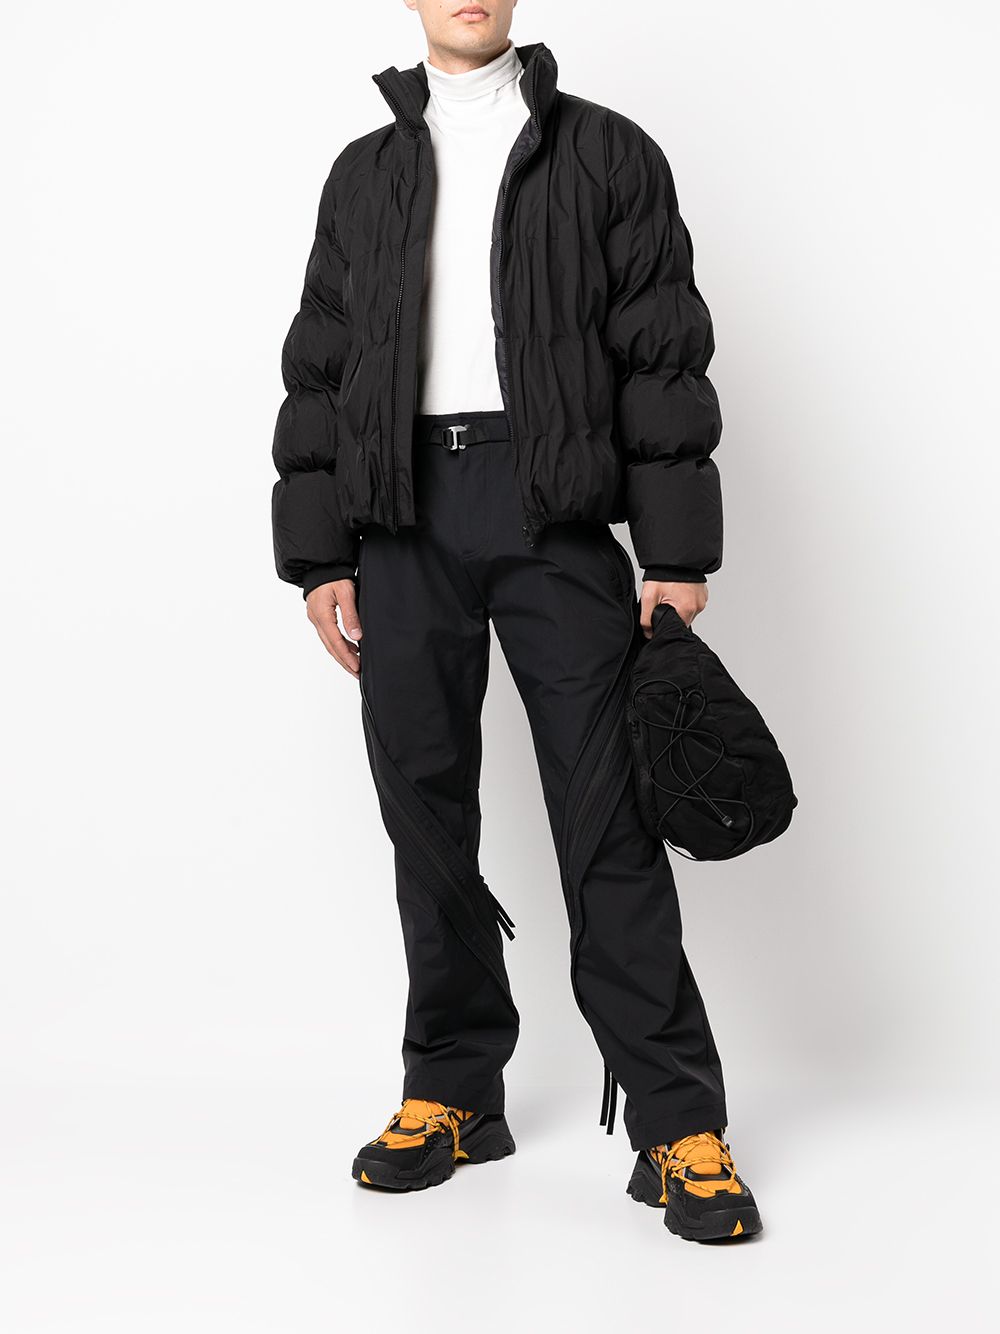 Post Archive Faction 4.0+ Right Down Jacket - Farfetch